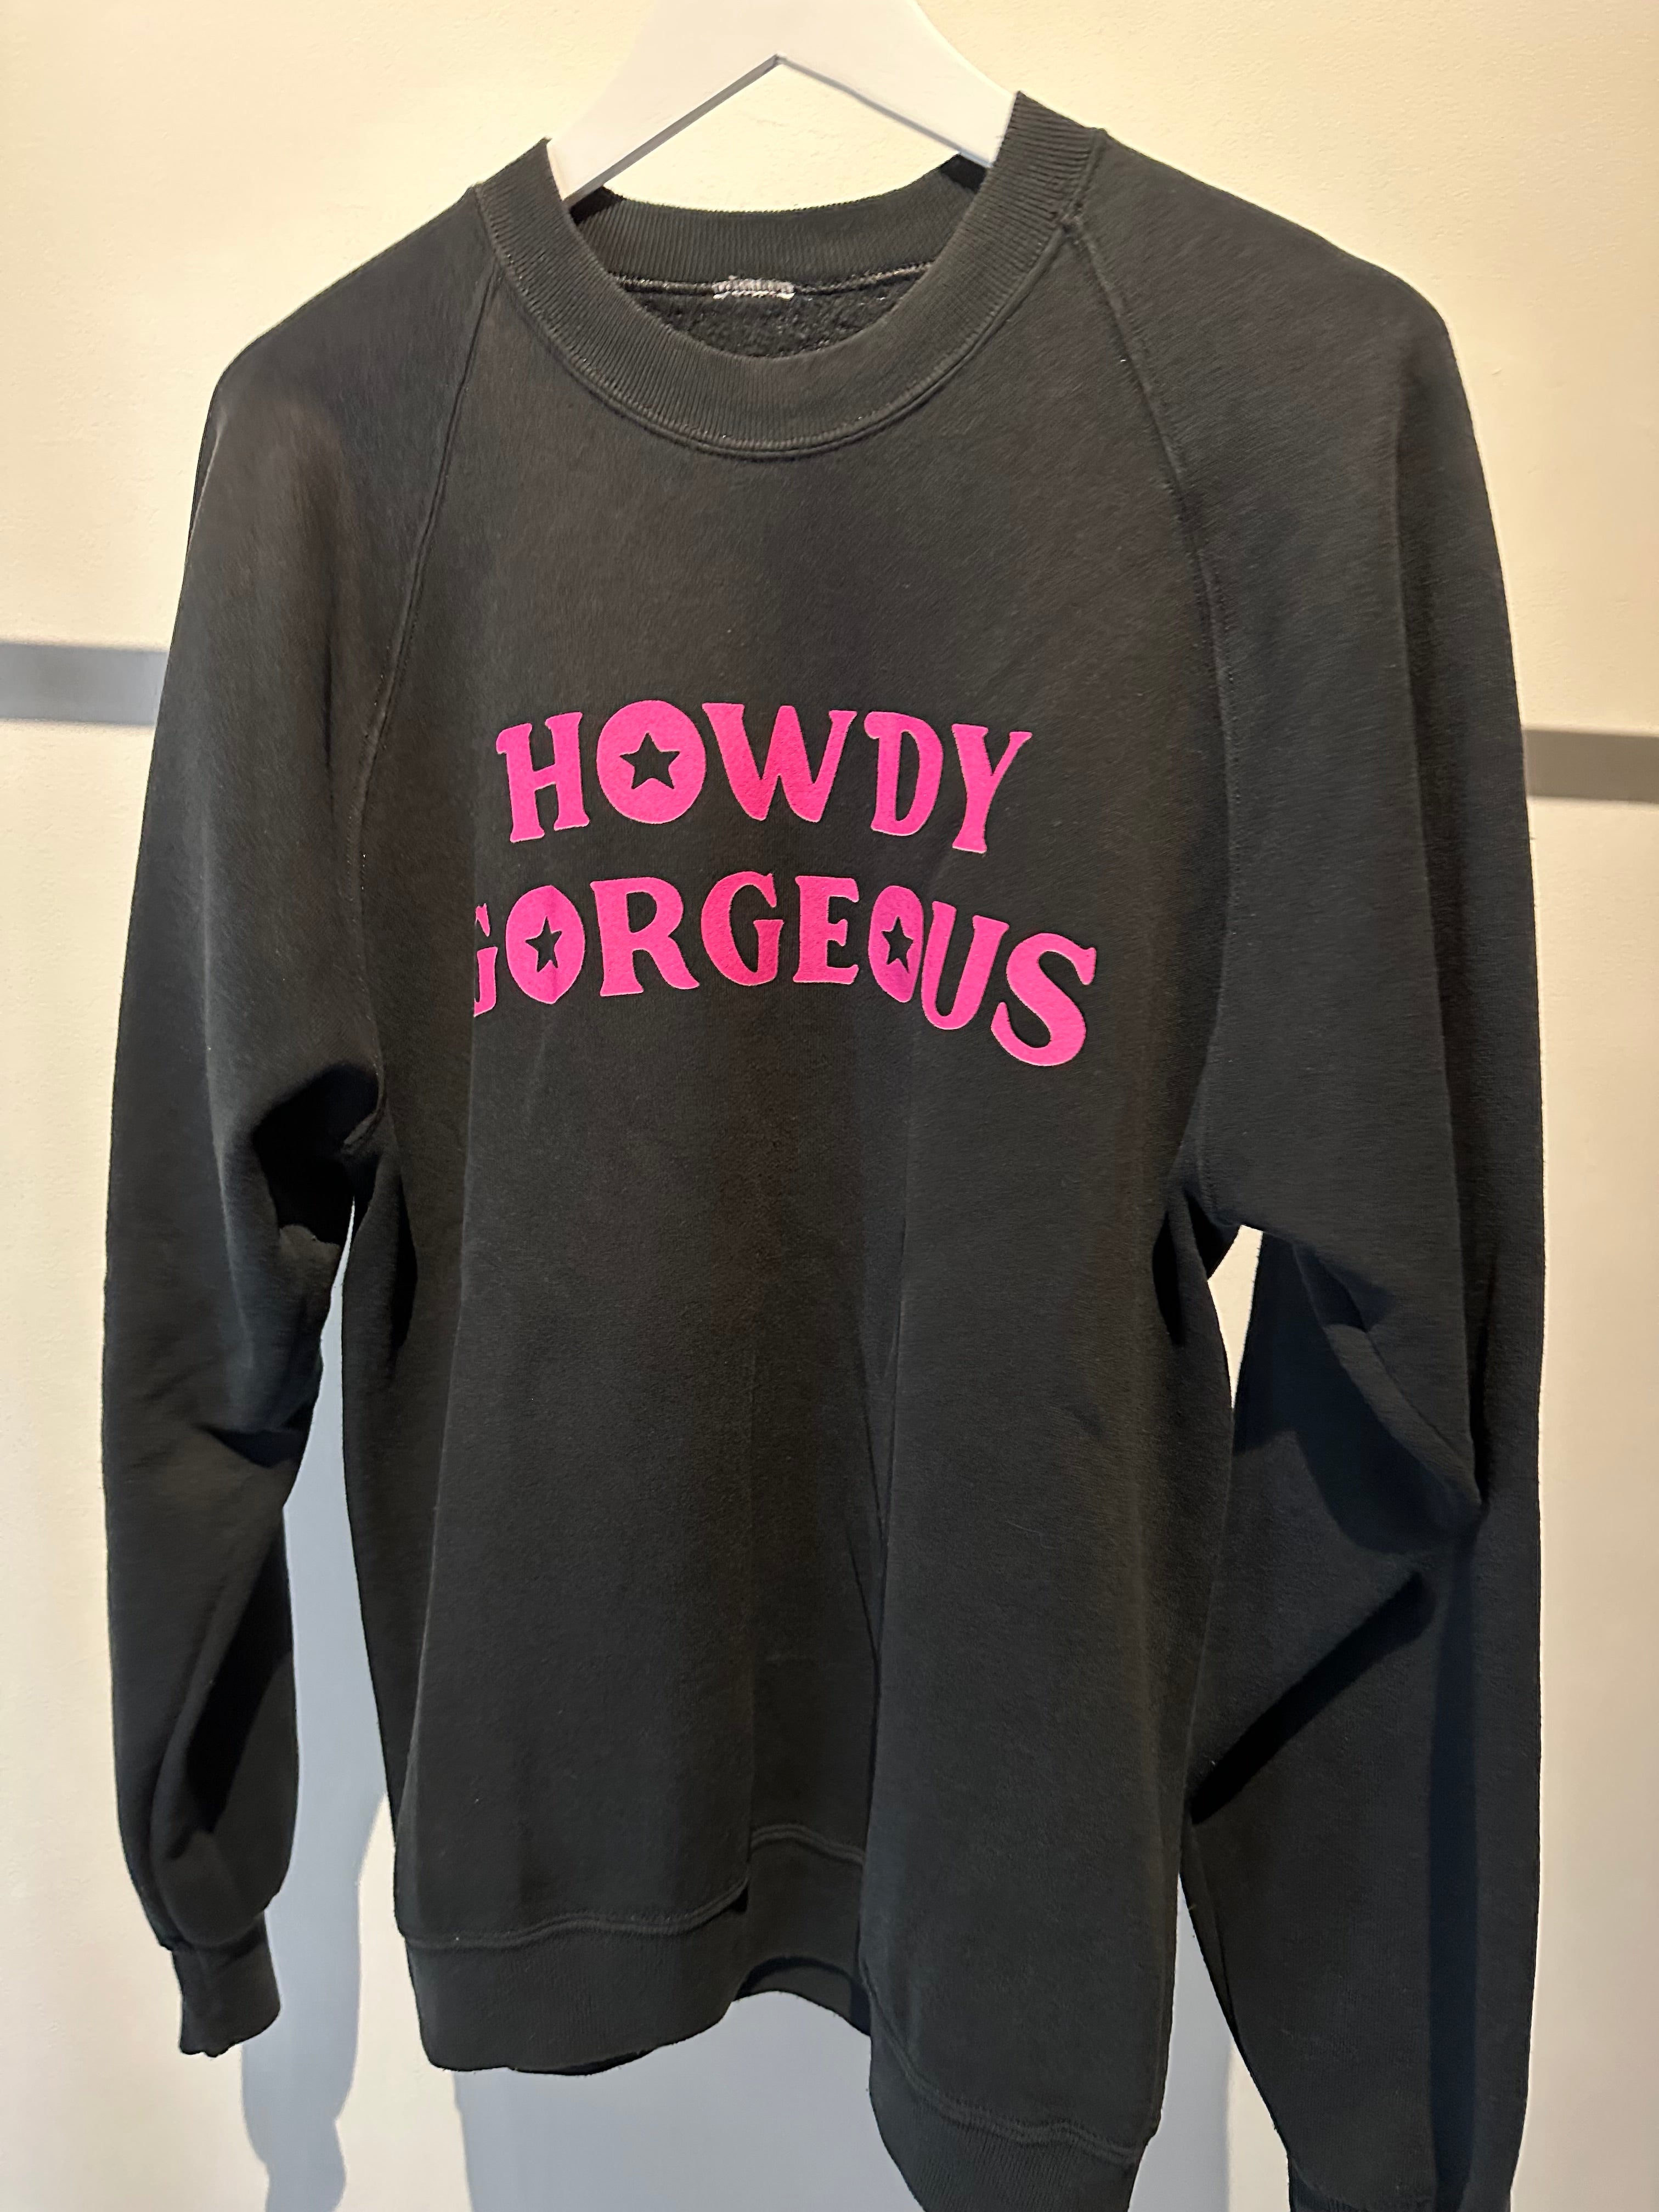 Vintage Howdy Gorgeous Pullover- pink on black